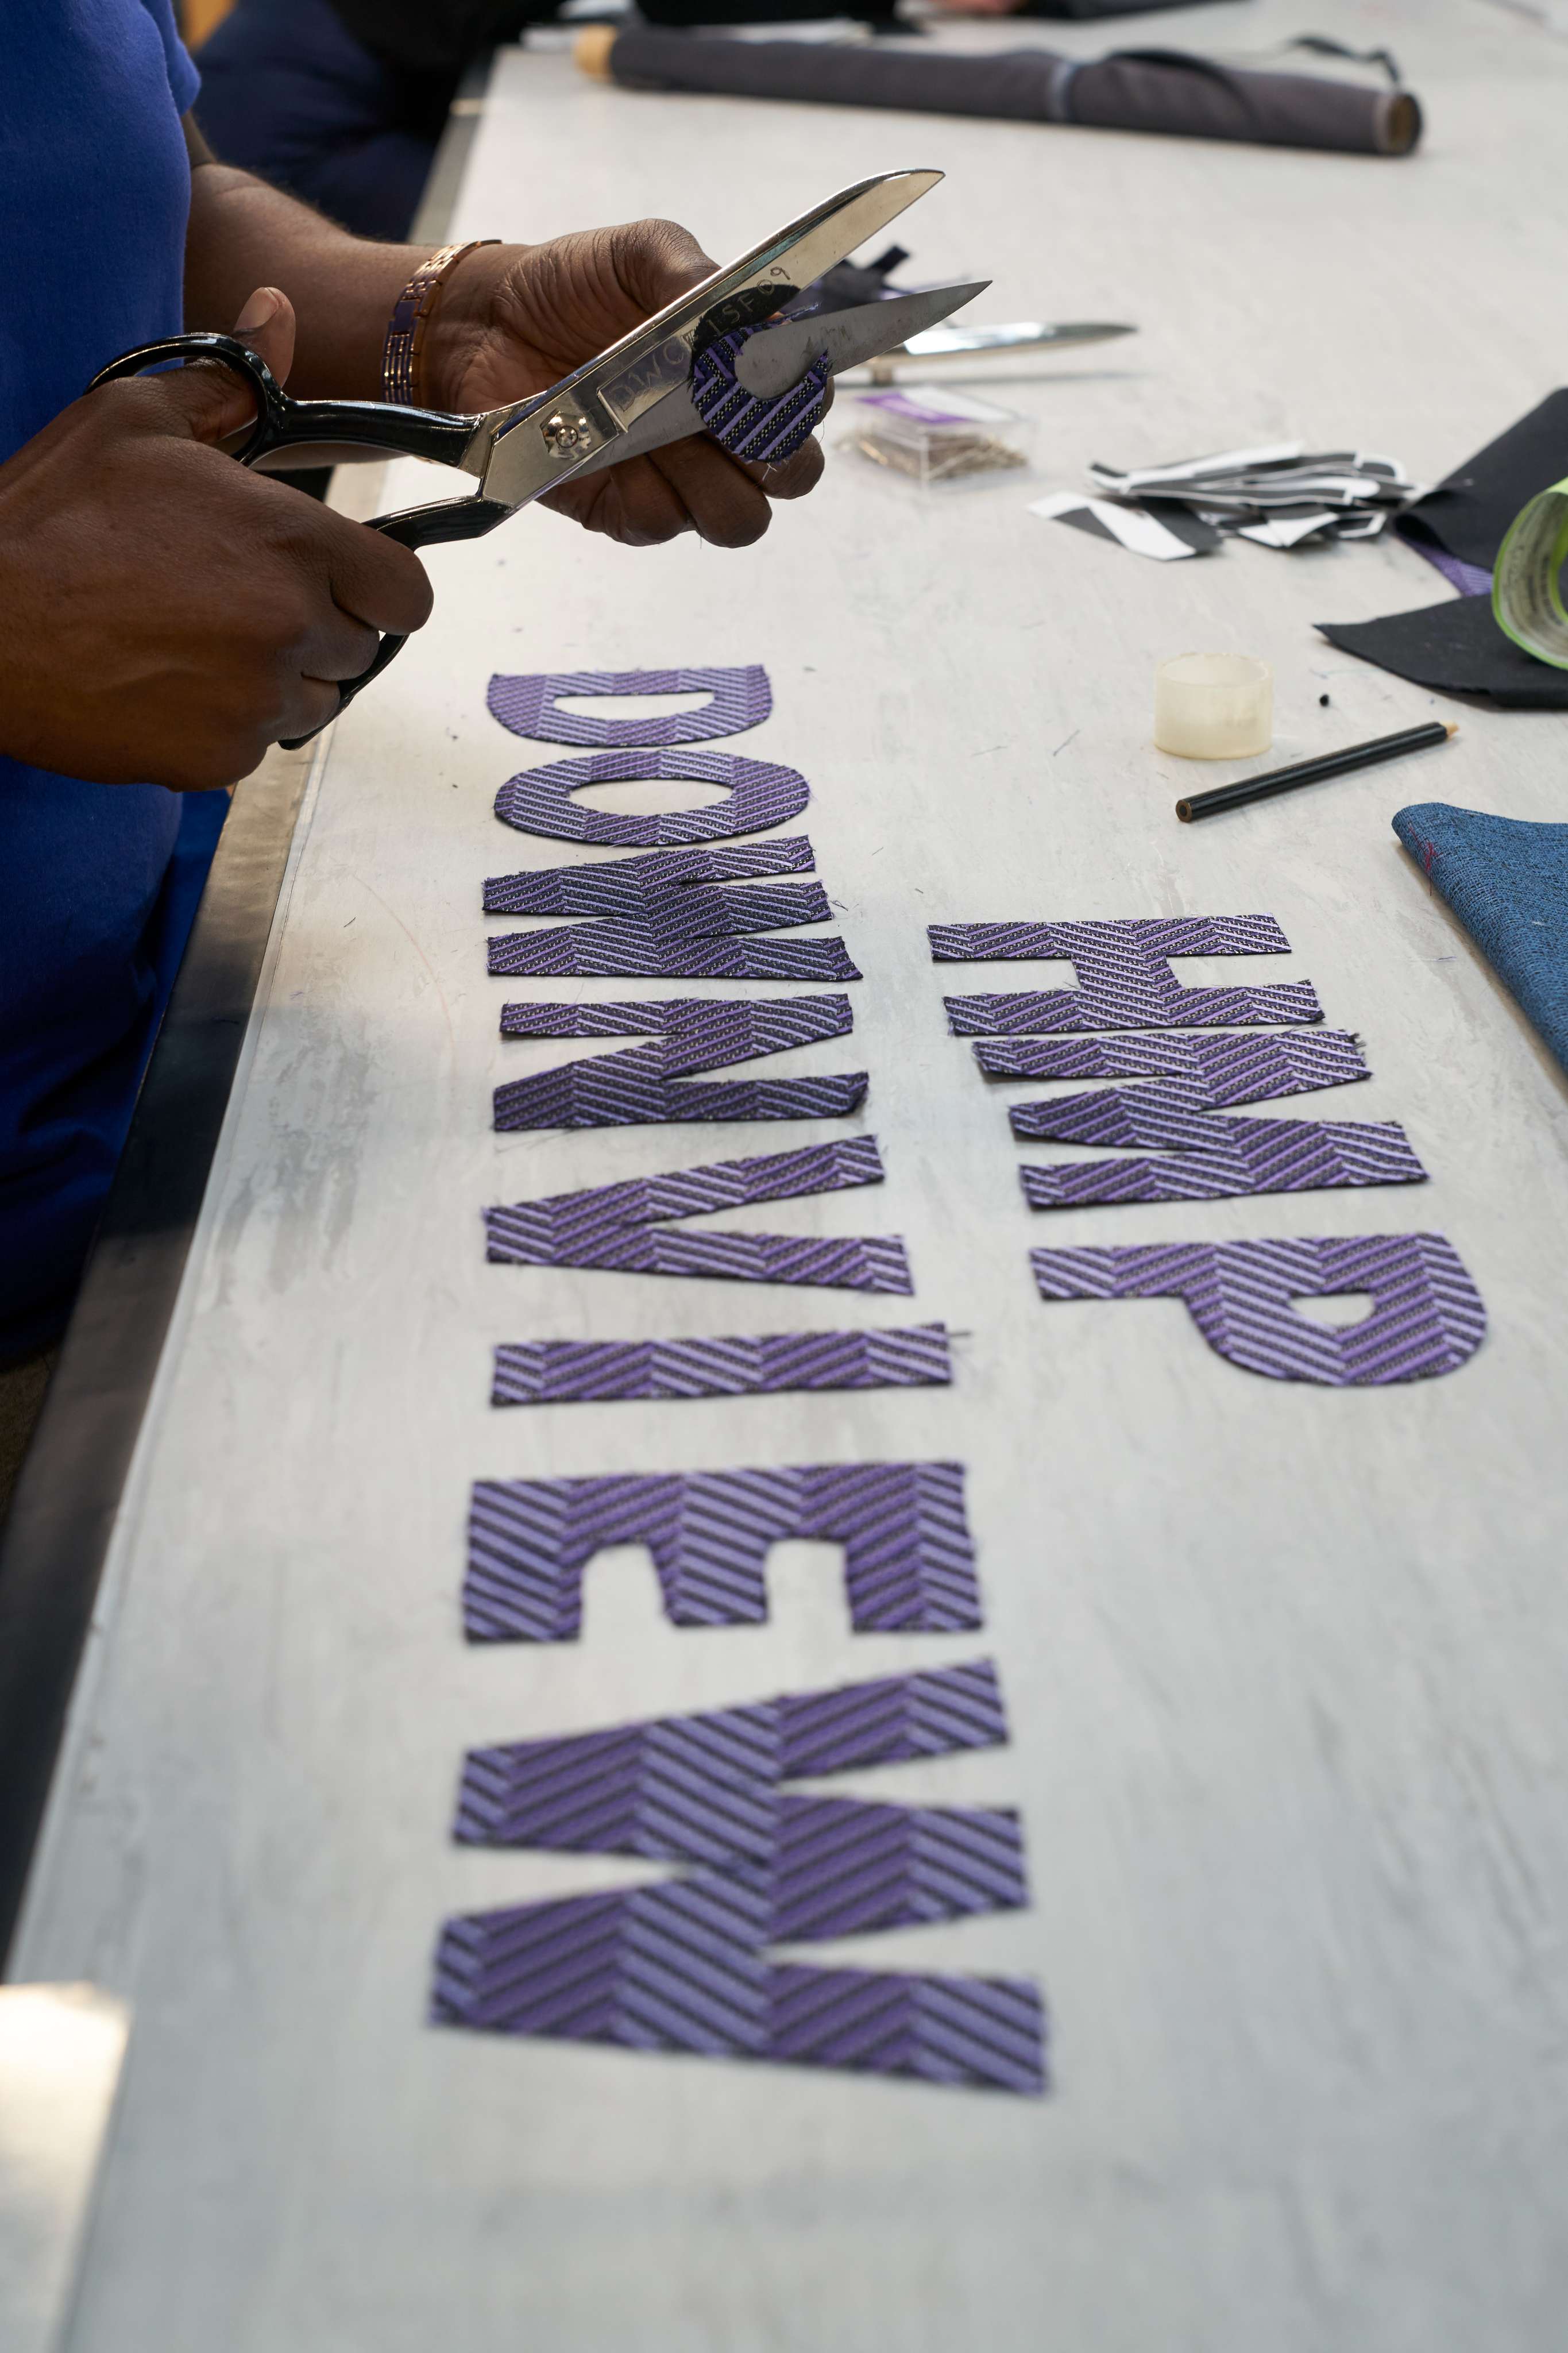 A pair of hands cuts the letters 'HMP DOWNVIEW' out of purple fabric.